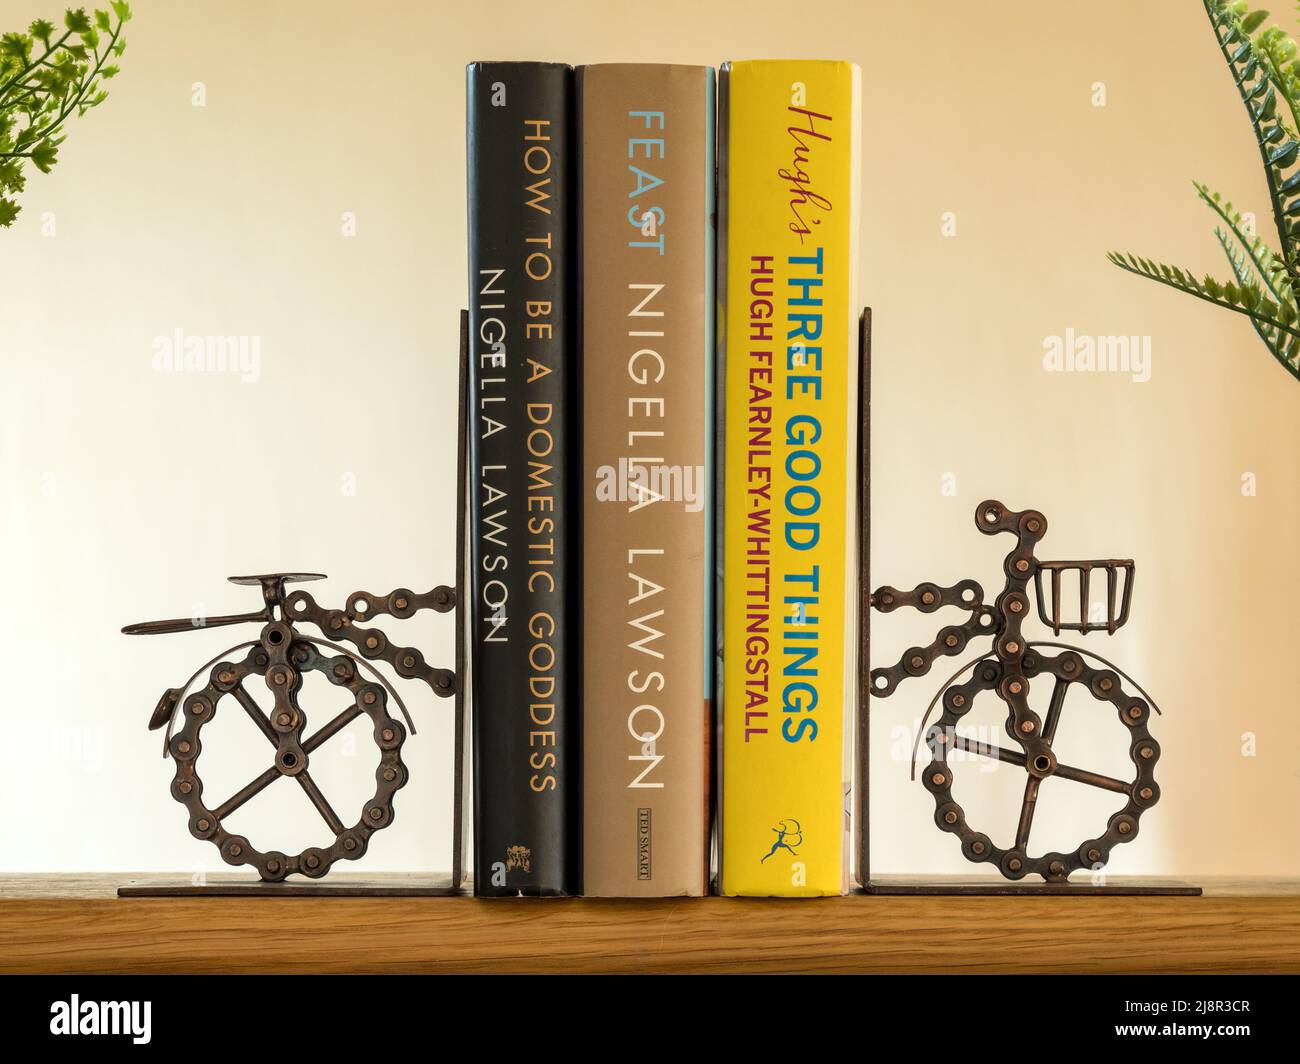 Novelty bicycle bookends made from a bicycle chain supporting 3 cookbooks on Kitchen shelf Stock Photo